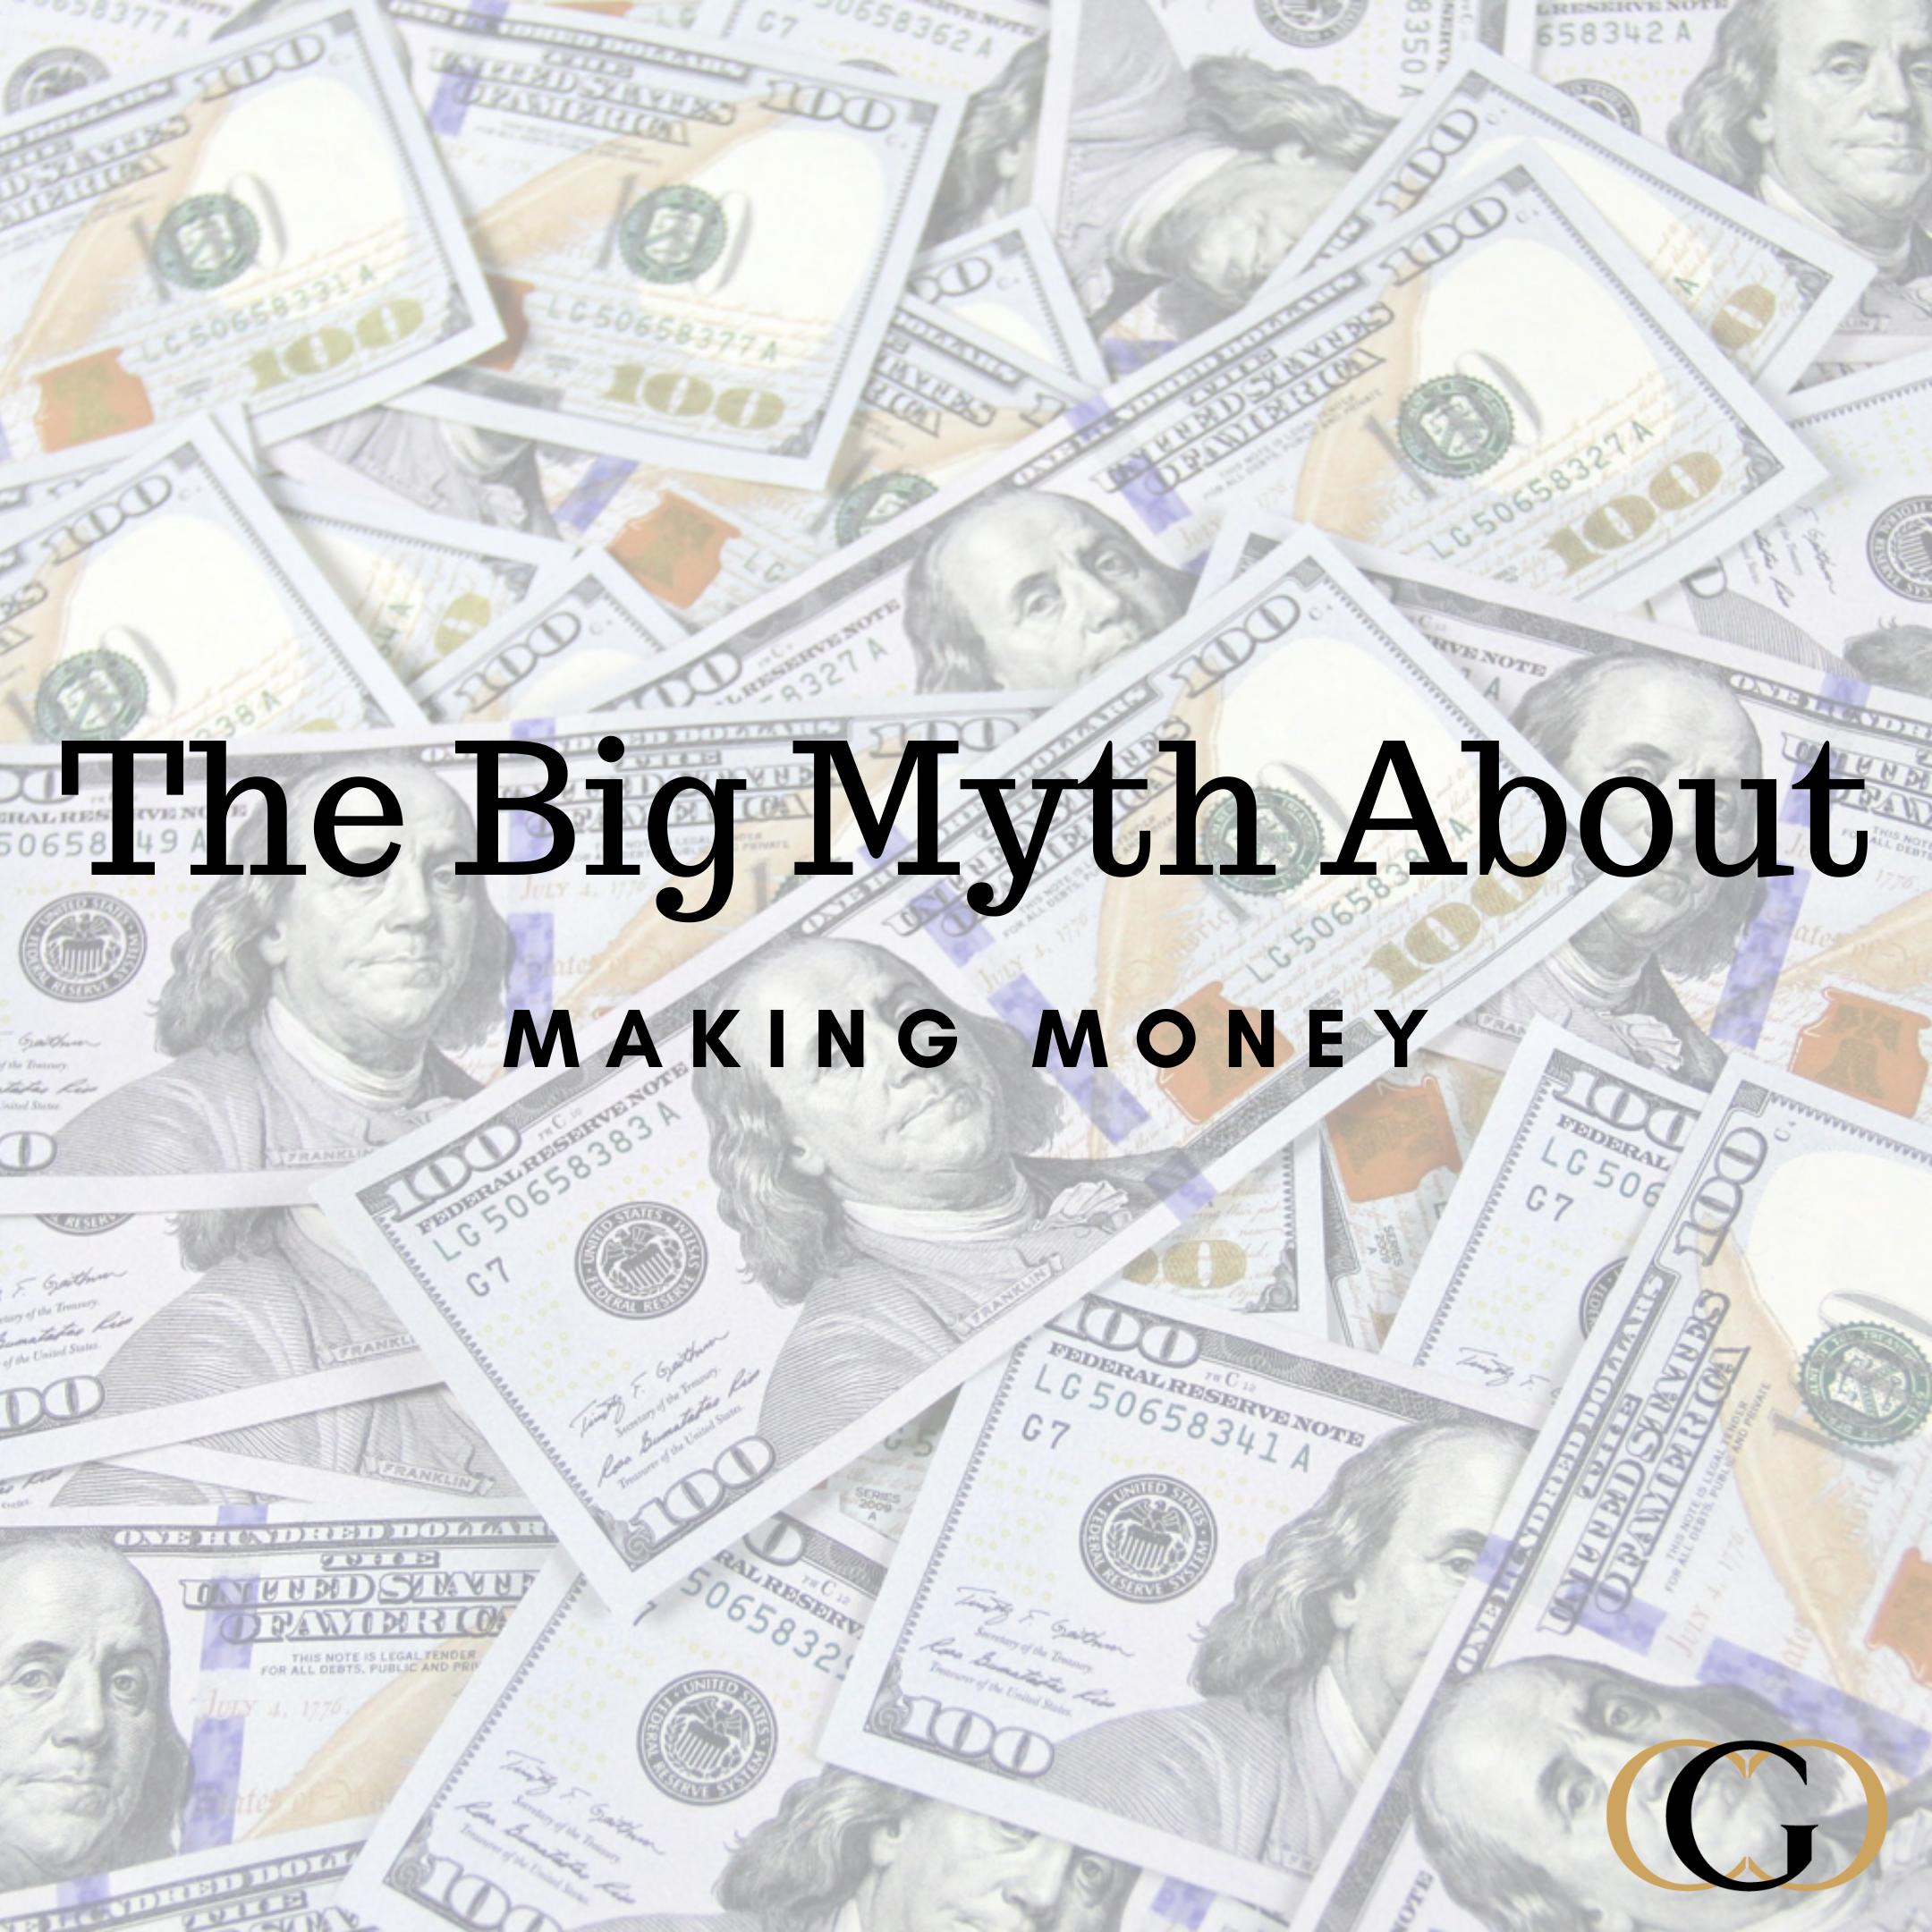 The Big Myth About Making Money